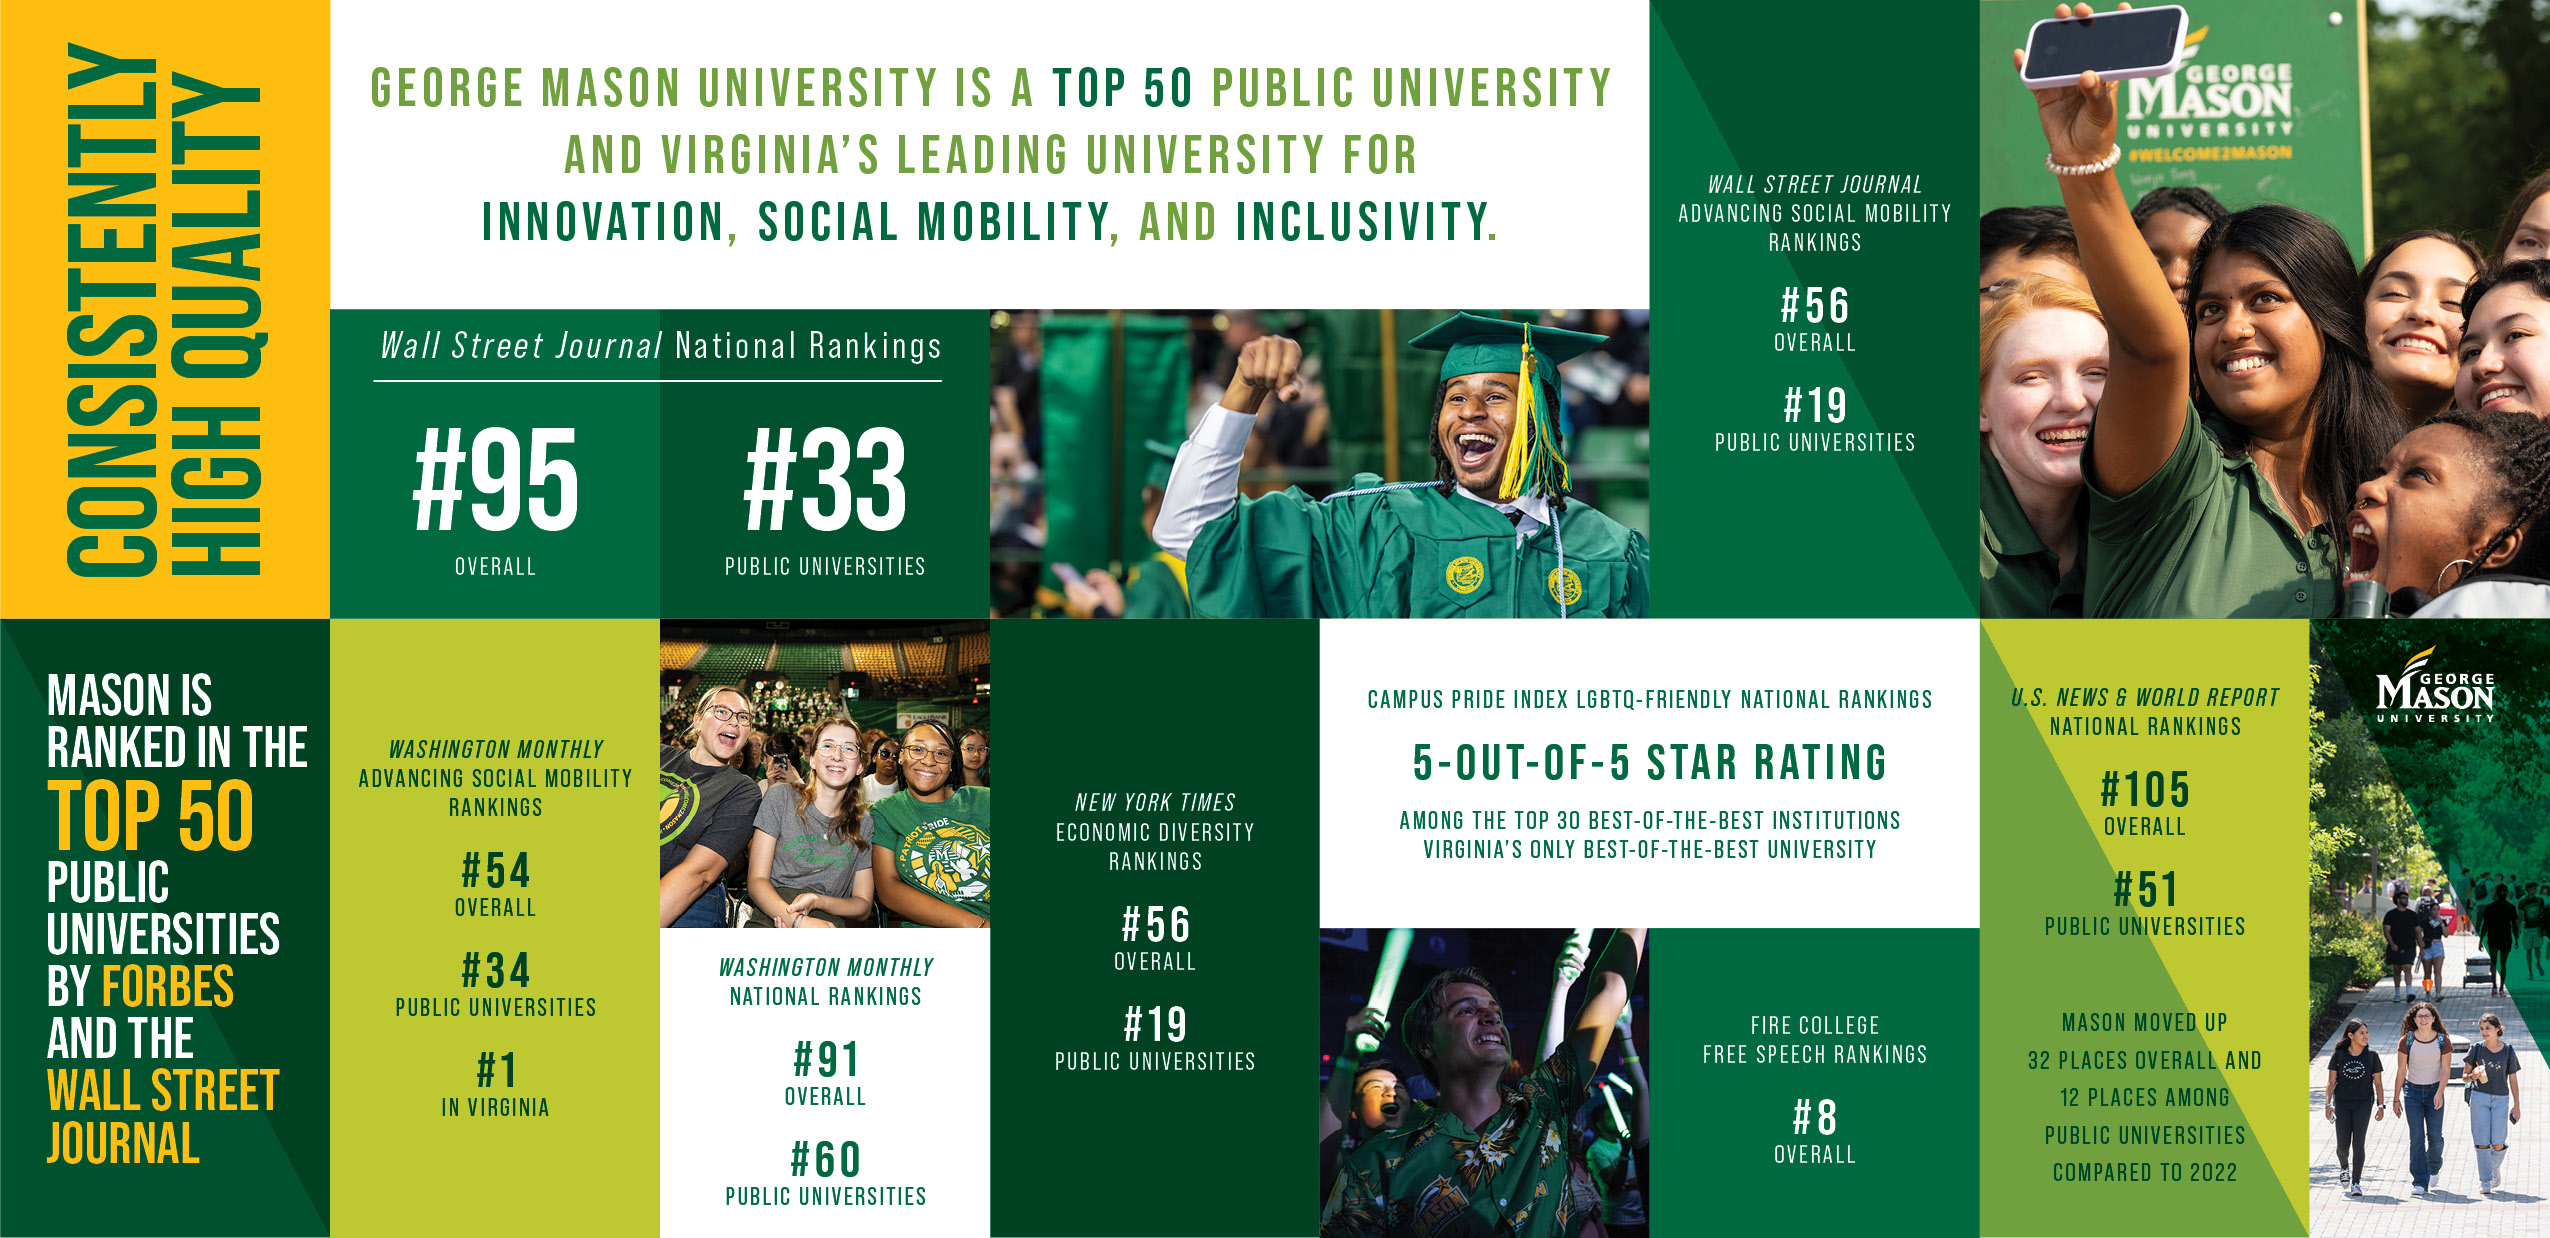 Mason soars inthe national rankings creative reads Consistently high quality, Wall Street Journal rankings #95 overall, #33 public universities, 5-out-of-5 Star rating from Pride Index. U.S. News & World Report National Ranking #105 overall, #51 for public universities. Mason is ranked in the Top 50 public universities by Forbes and the Wall Street Journal.